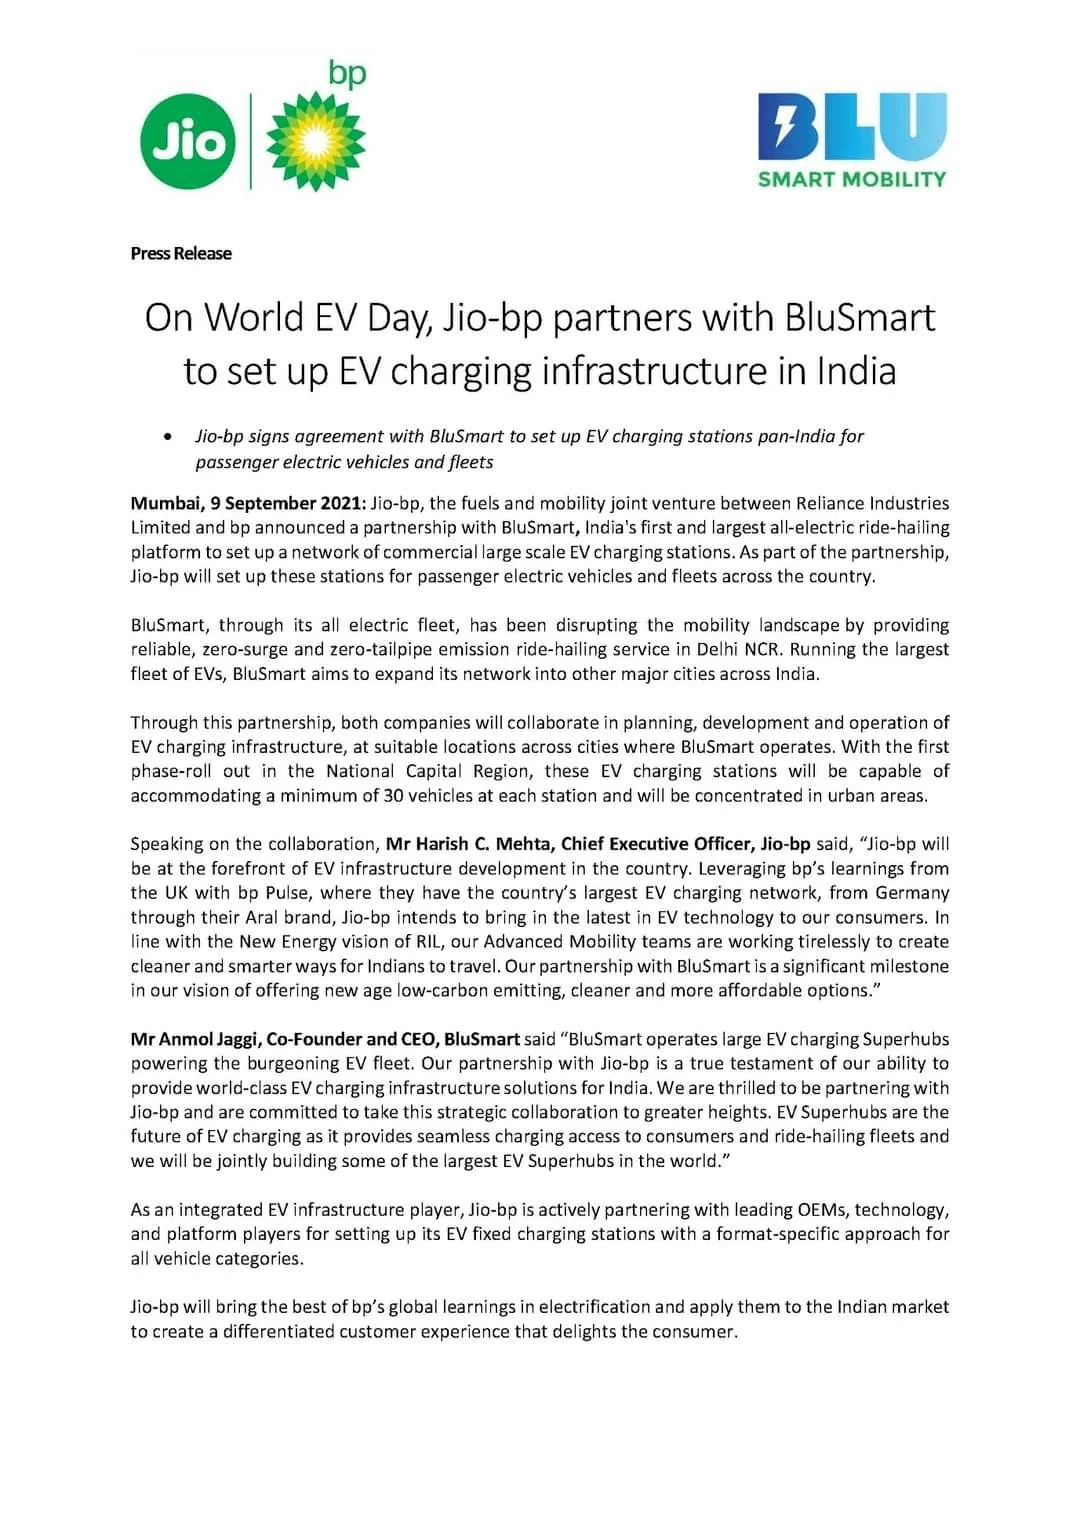 https://e-vehicleinfo.com/jio-bp-partners-with-blusmart-to-set-up-ev-charging-infrastructure/